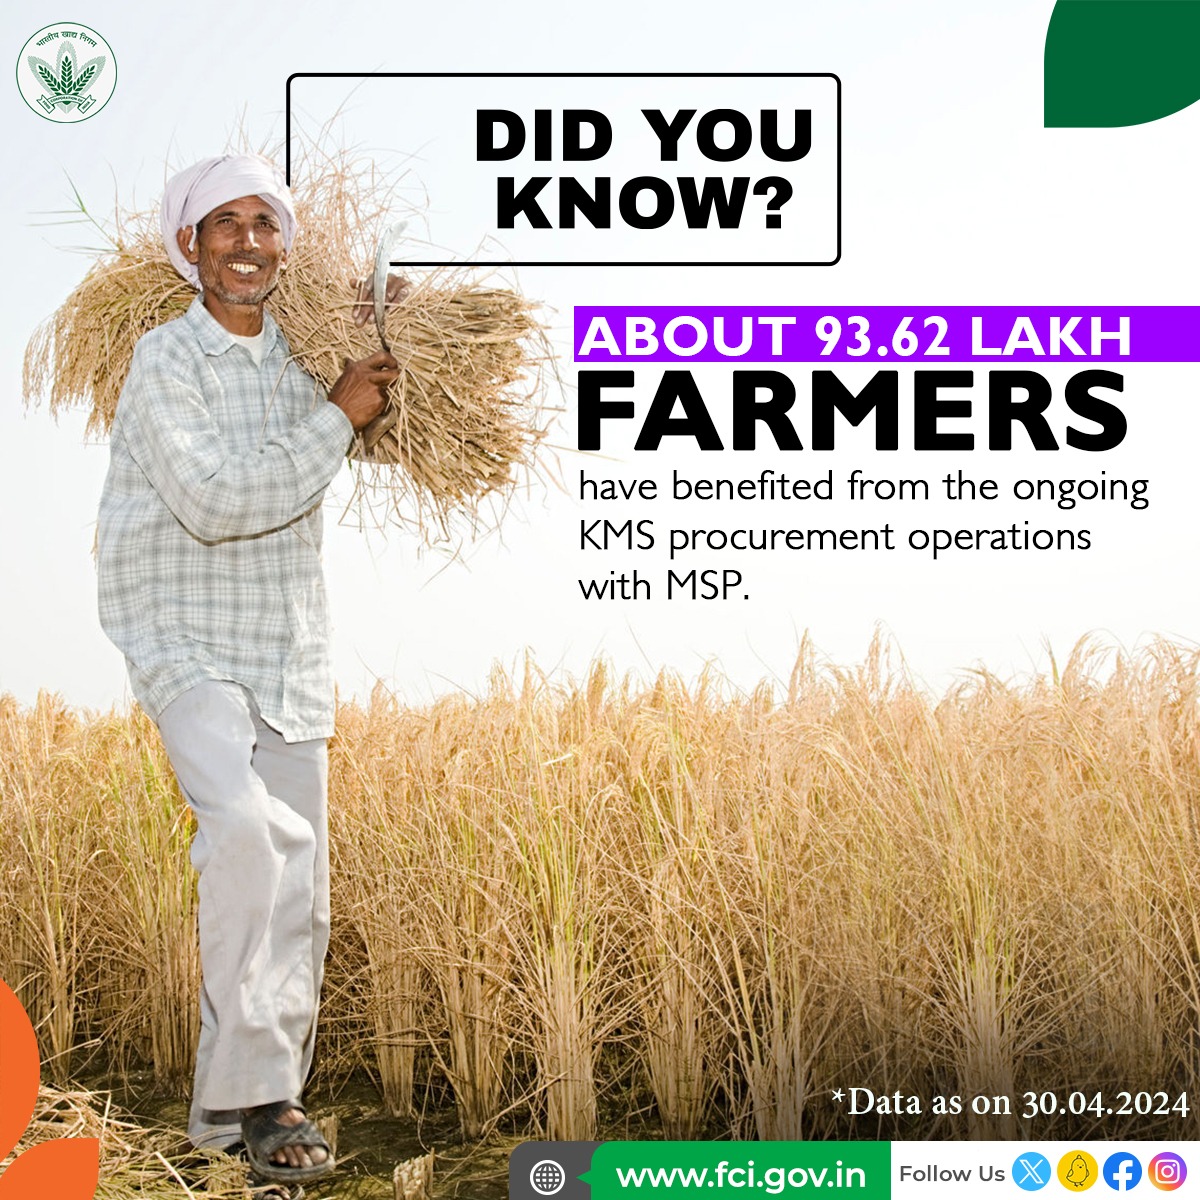 On the ongoing KMS procurement season, over 93.62 lakh farmers are supported by MSP to ensure fair returns and stability in prices to farmers.